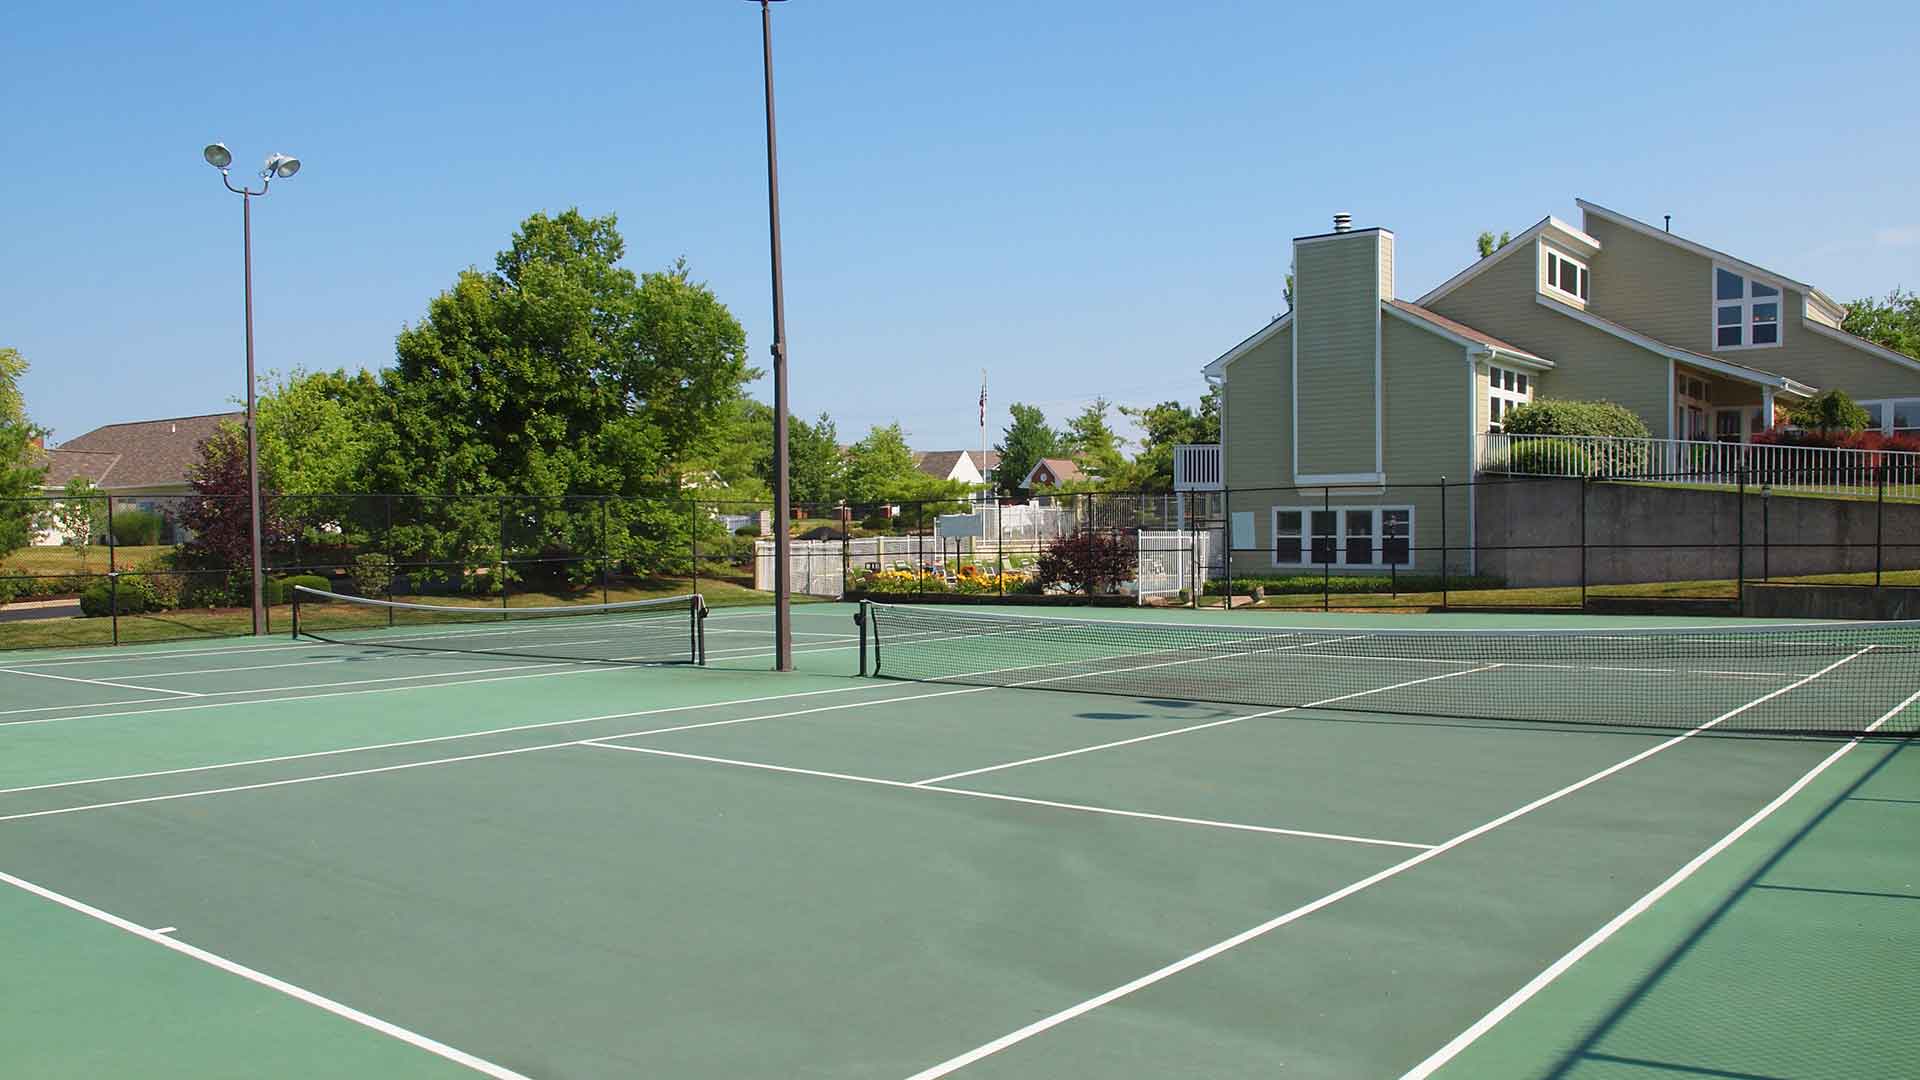 Two fenced in tennis courts at Island Club.